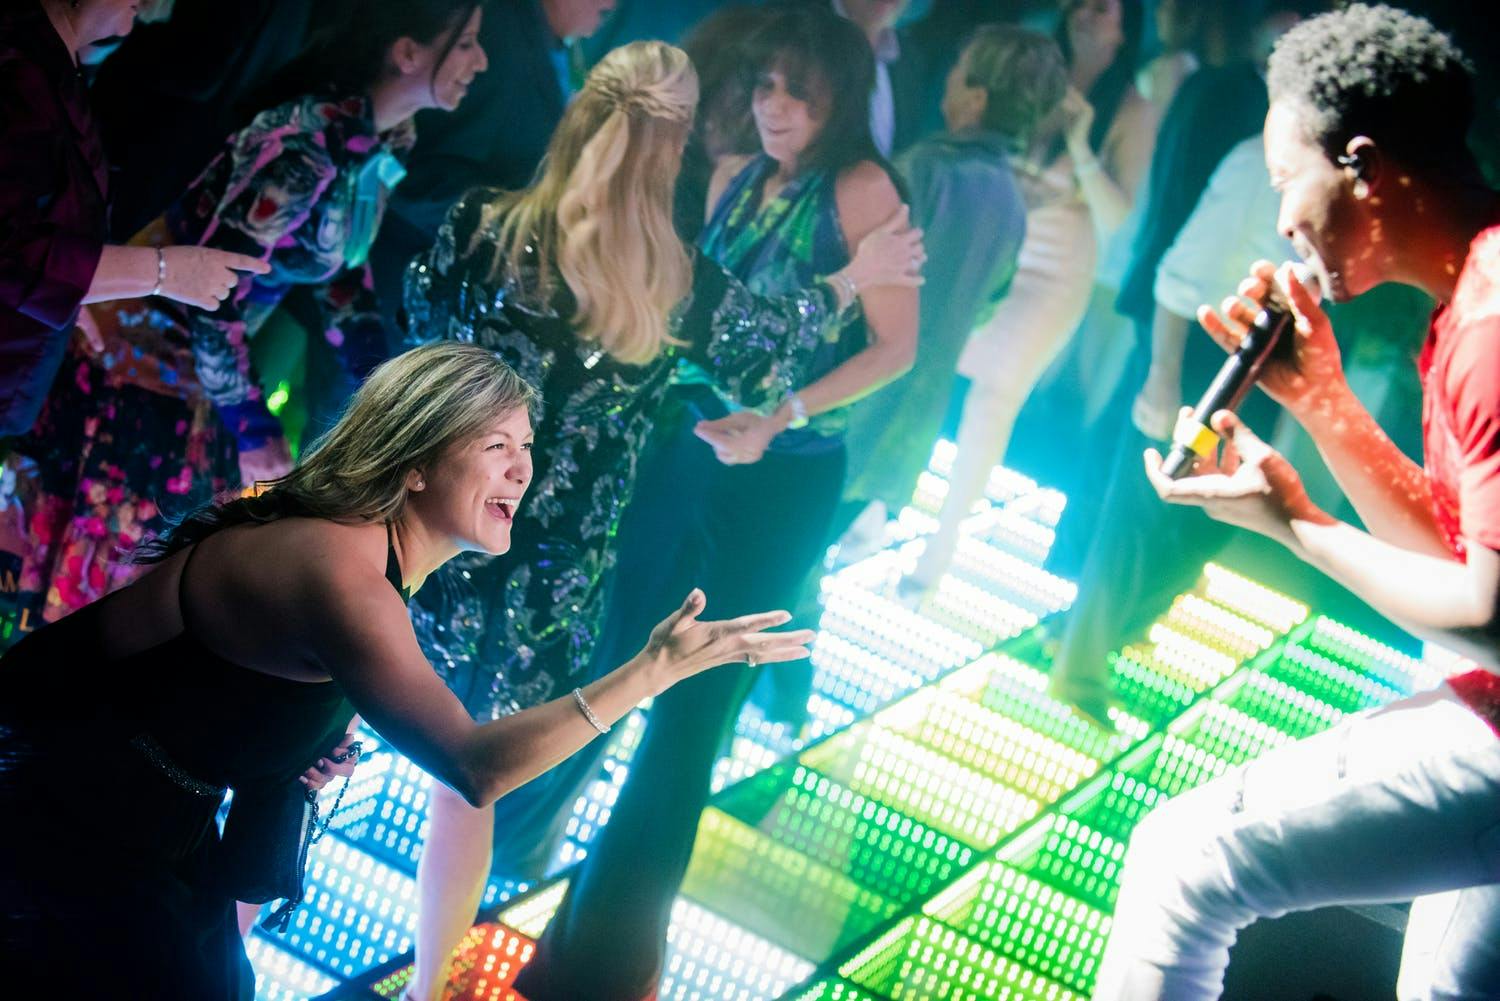 Band Sings to Woman on LED Dance Floor | PartySlate